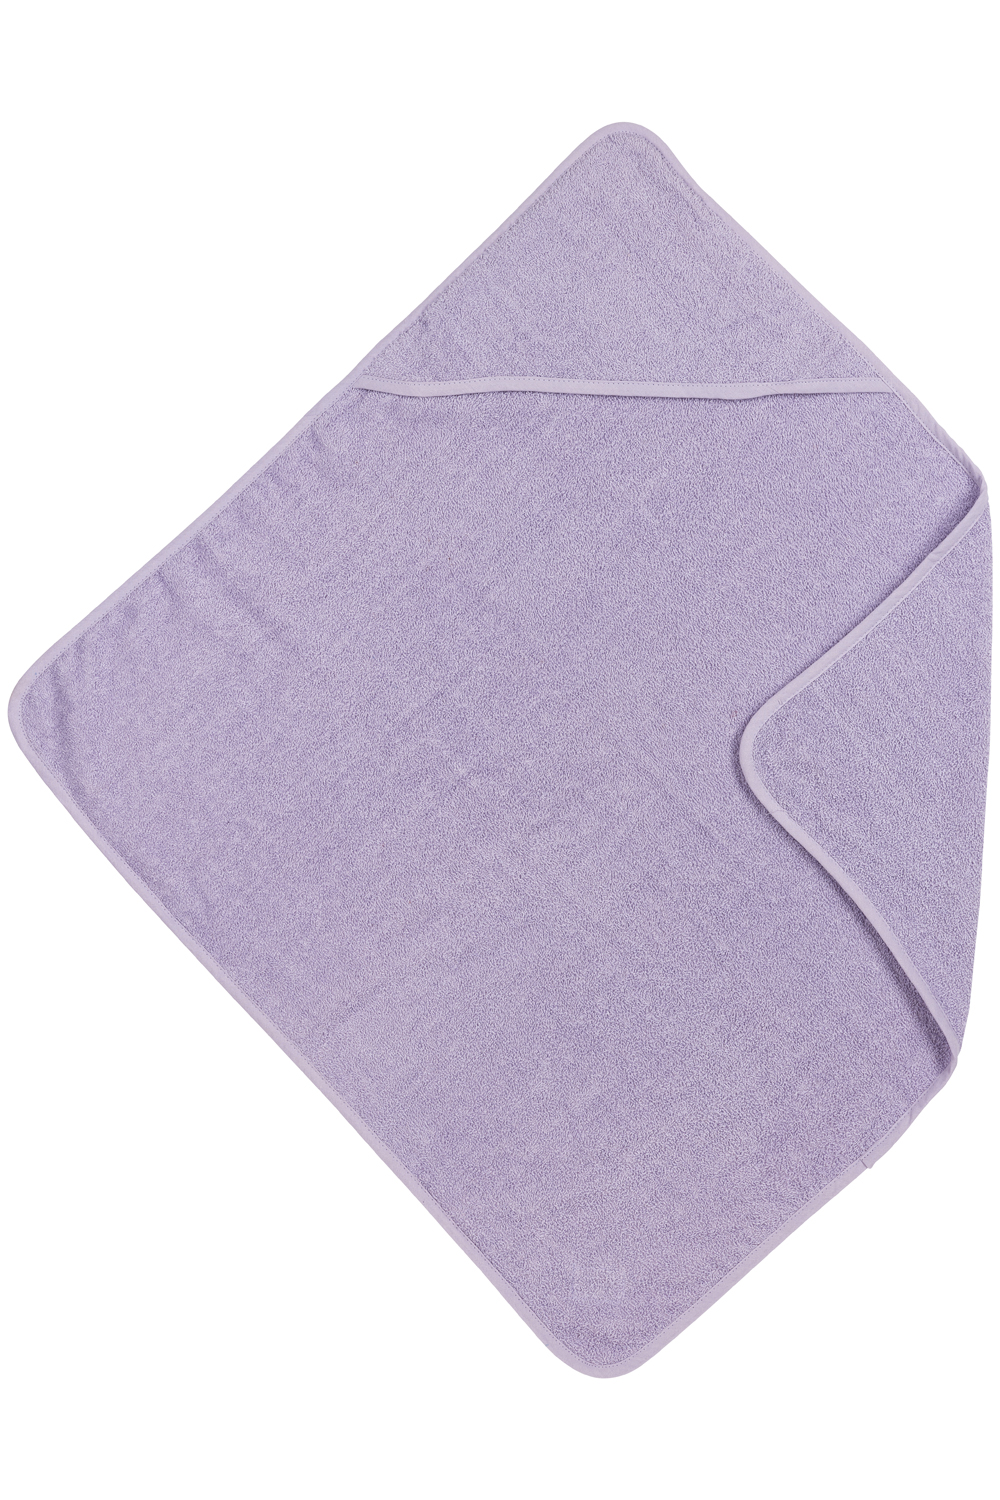 Kapuzentuch Frottee - Soft Lilac - 75x75cm